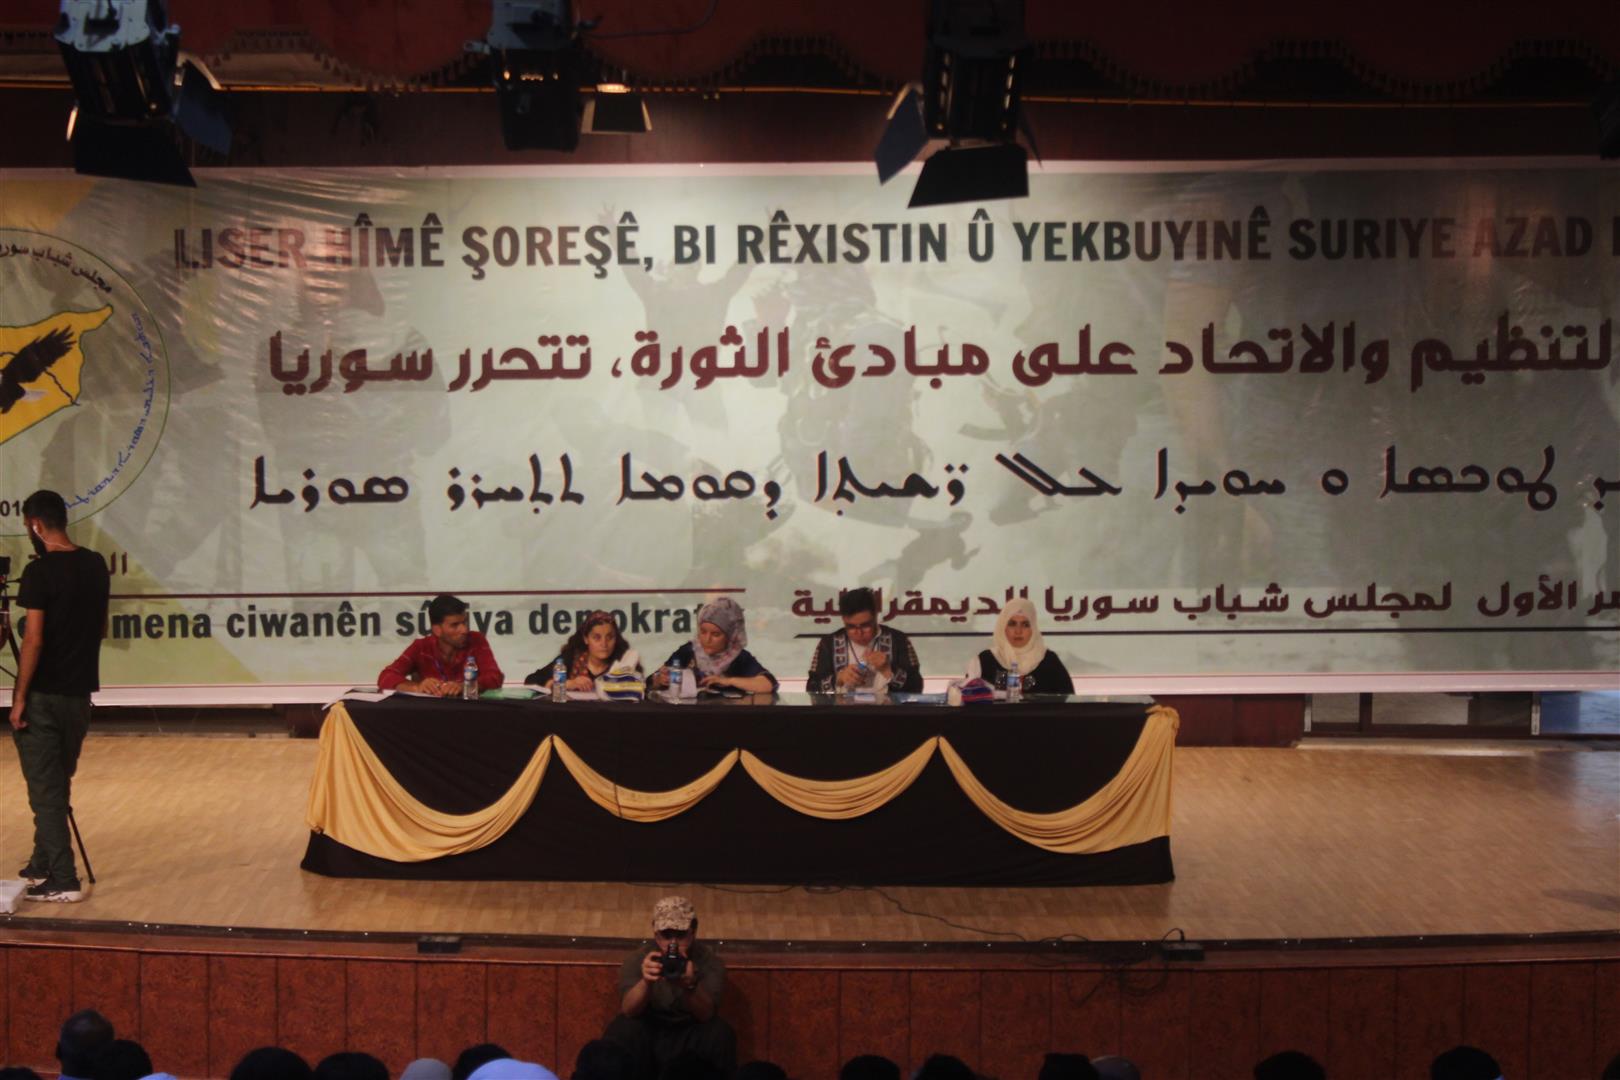  Youth's conference concluded with forming General Council